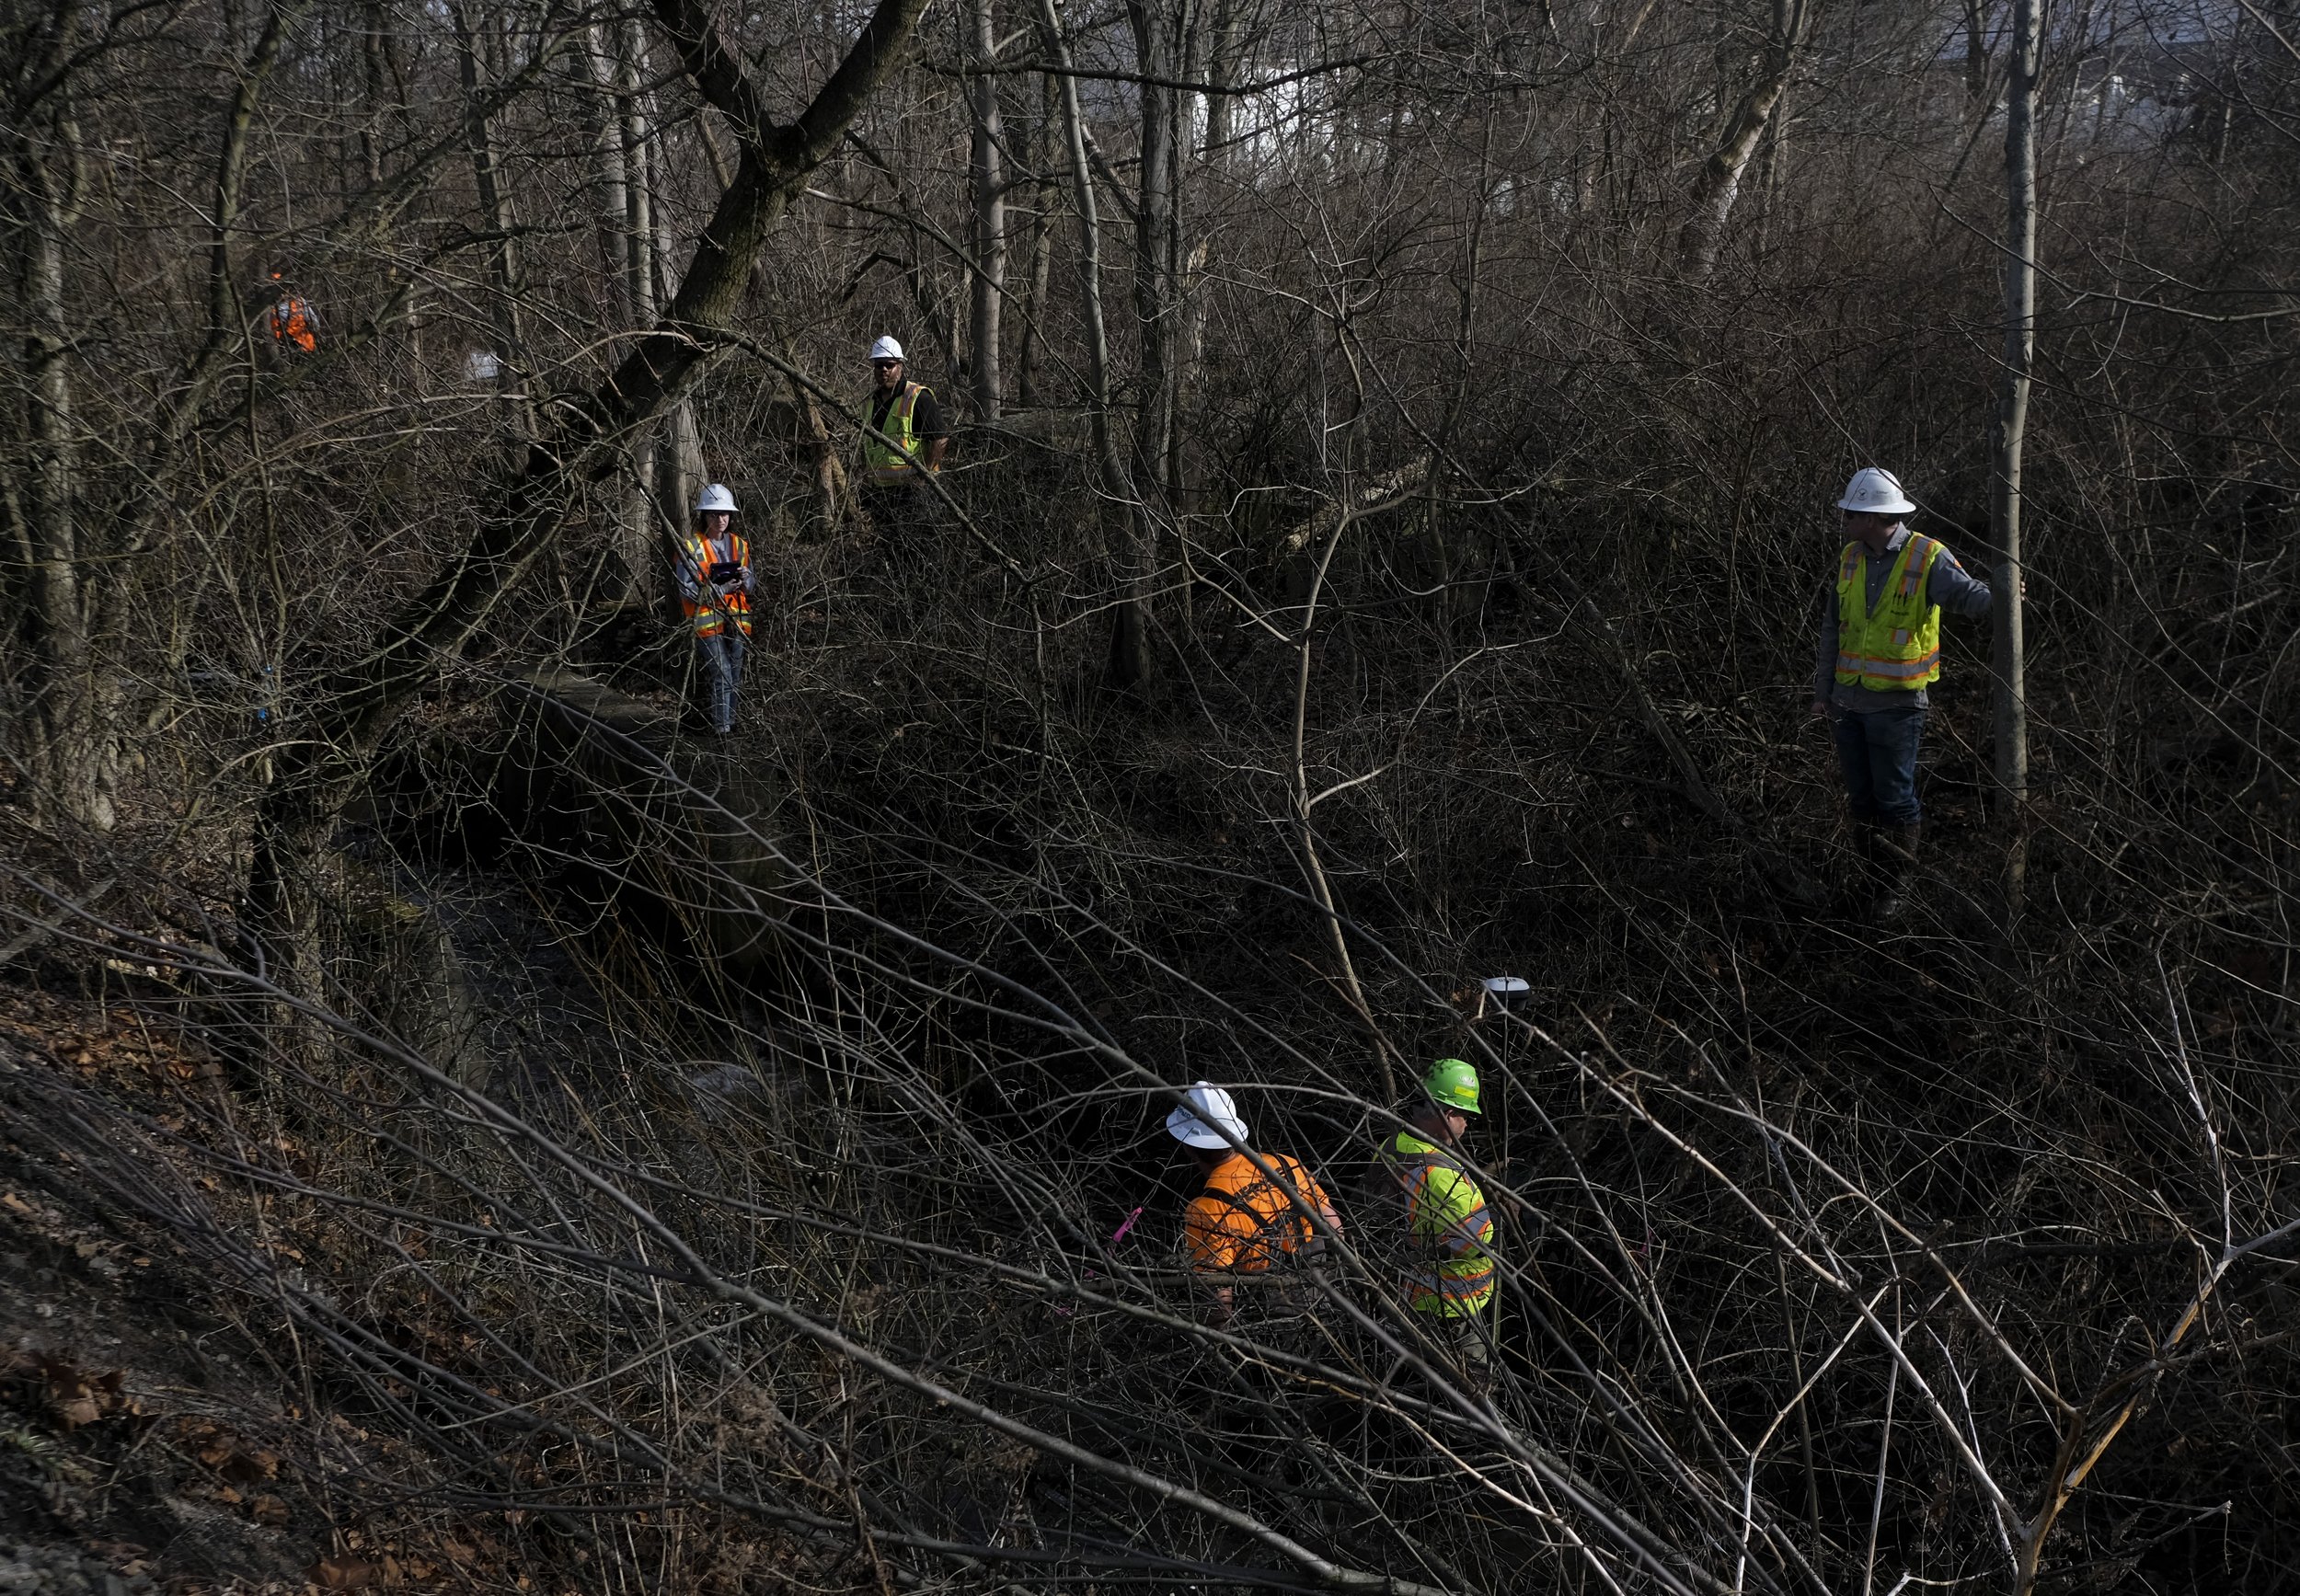  Members of the Environmental Protection Agency take samples of water from Sulphur Run near the rail road tracks in East Palestine, Ohio on Thursday, February 23, 2022. Chemicals from a Norfolk Southern freight train spilled into water ways after it 